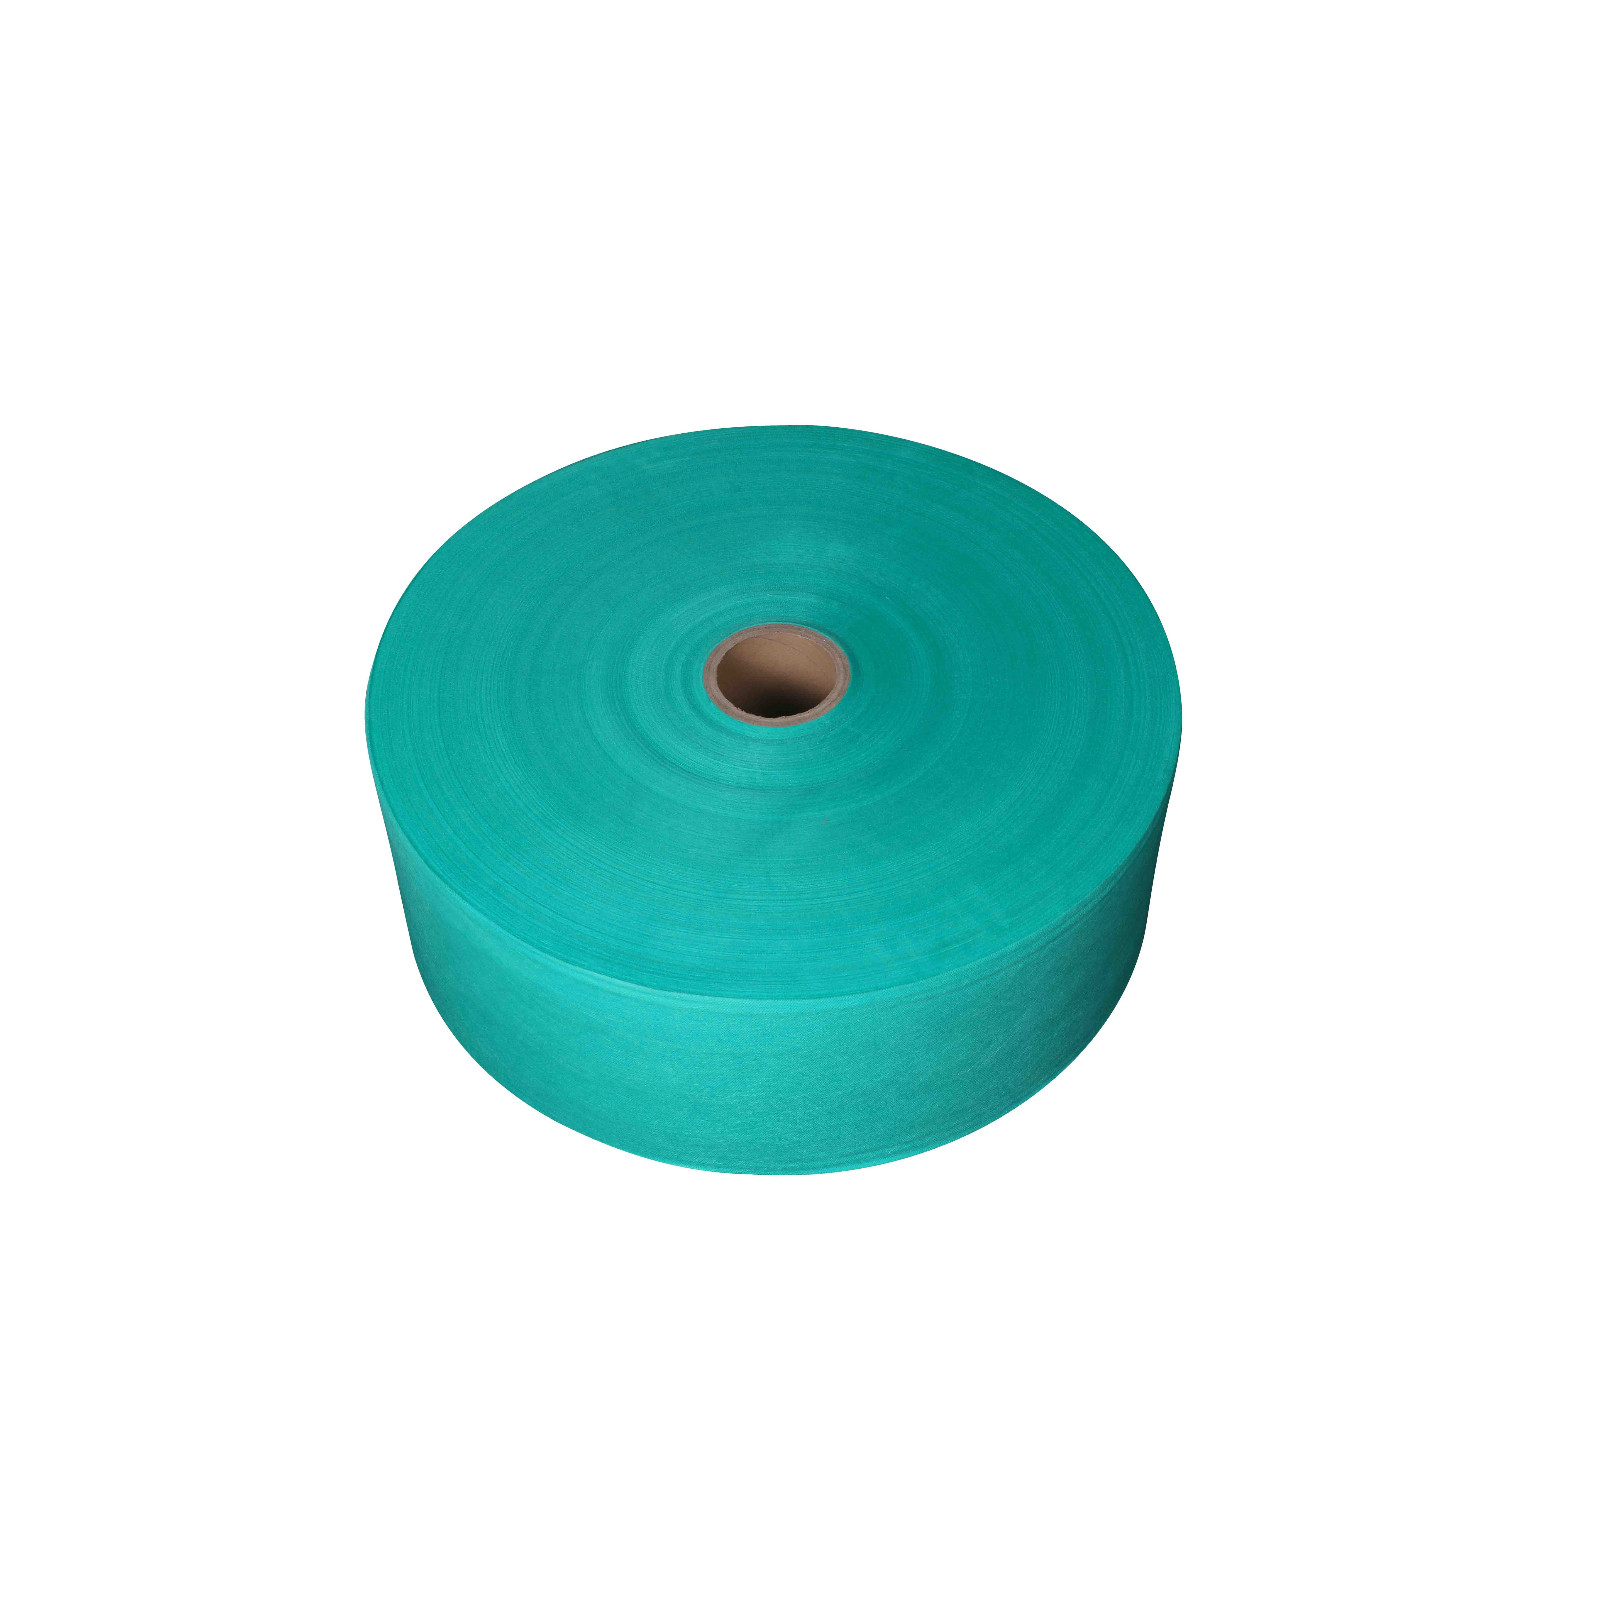 product-rayson nonwoven-img